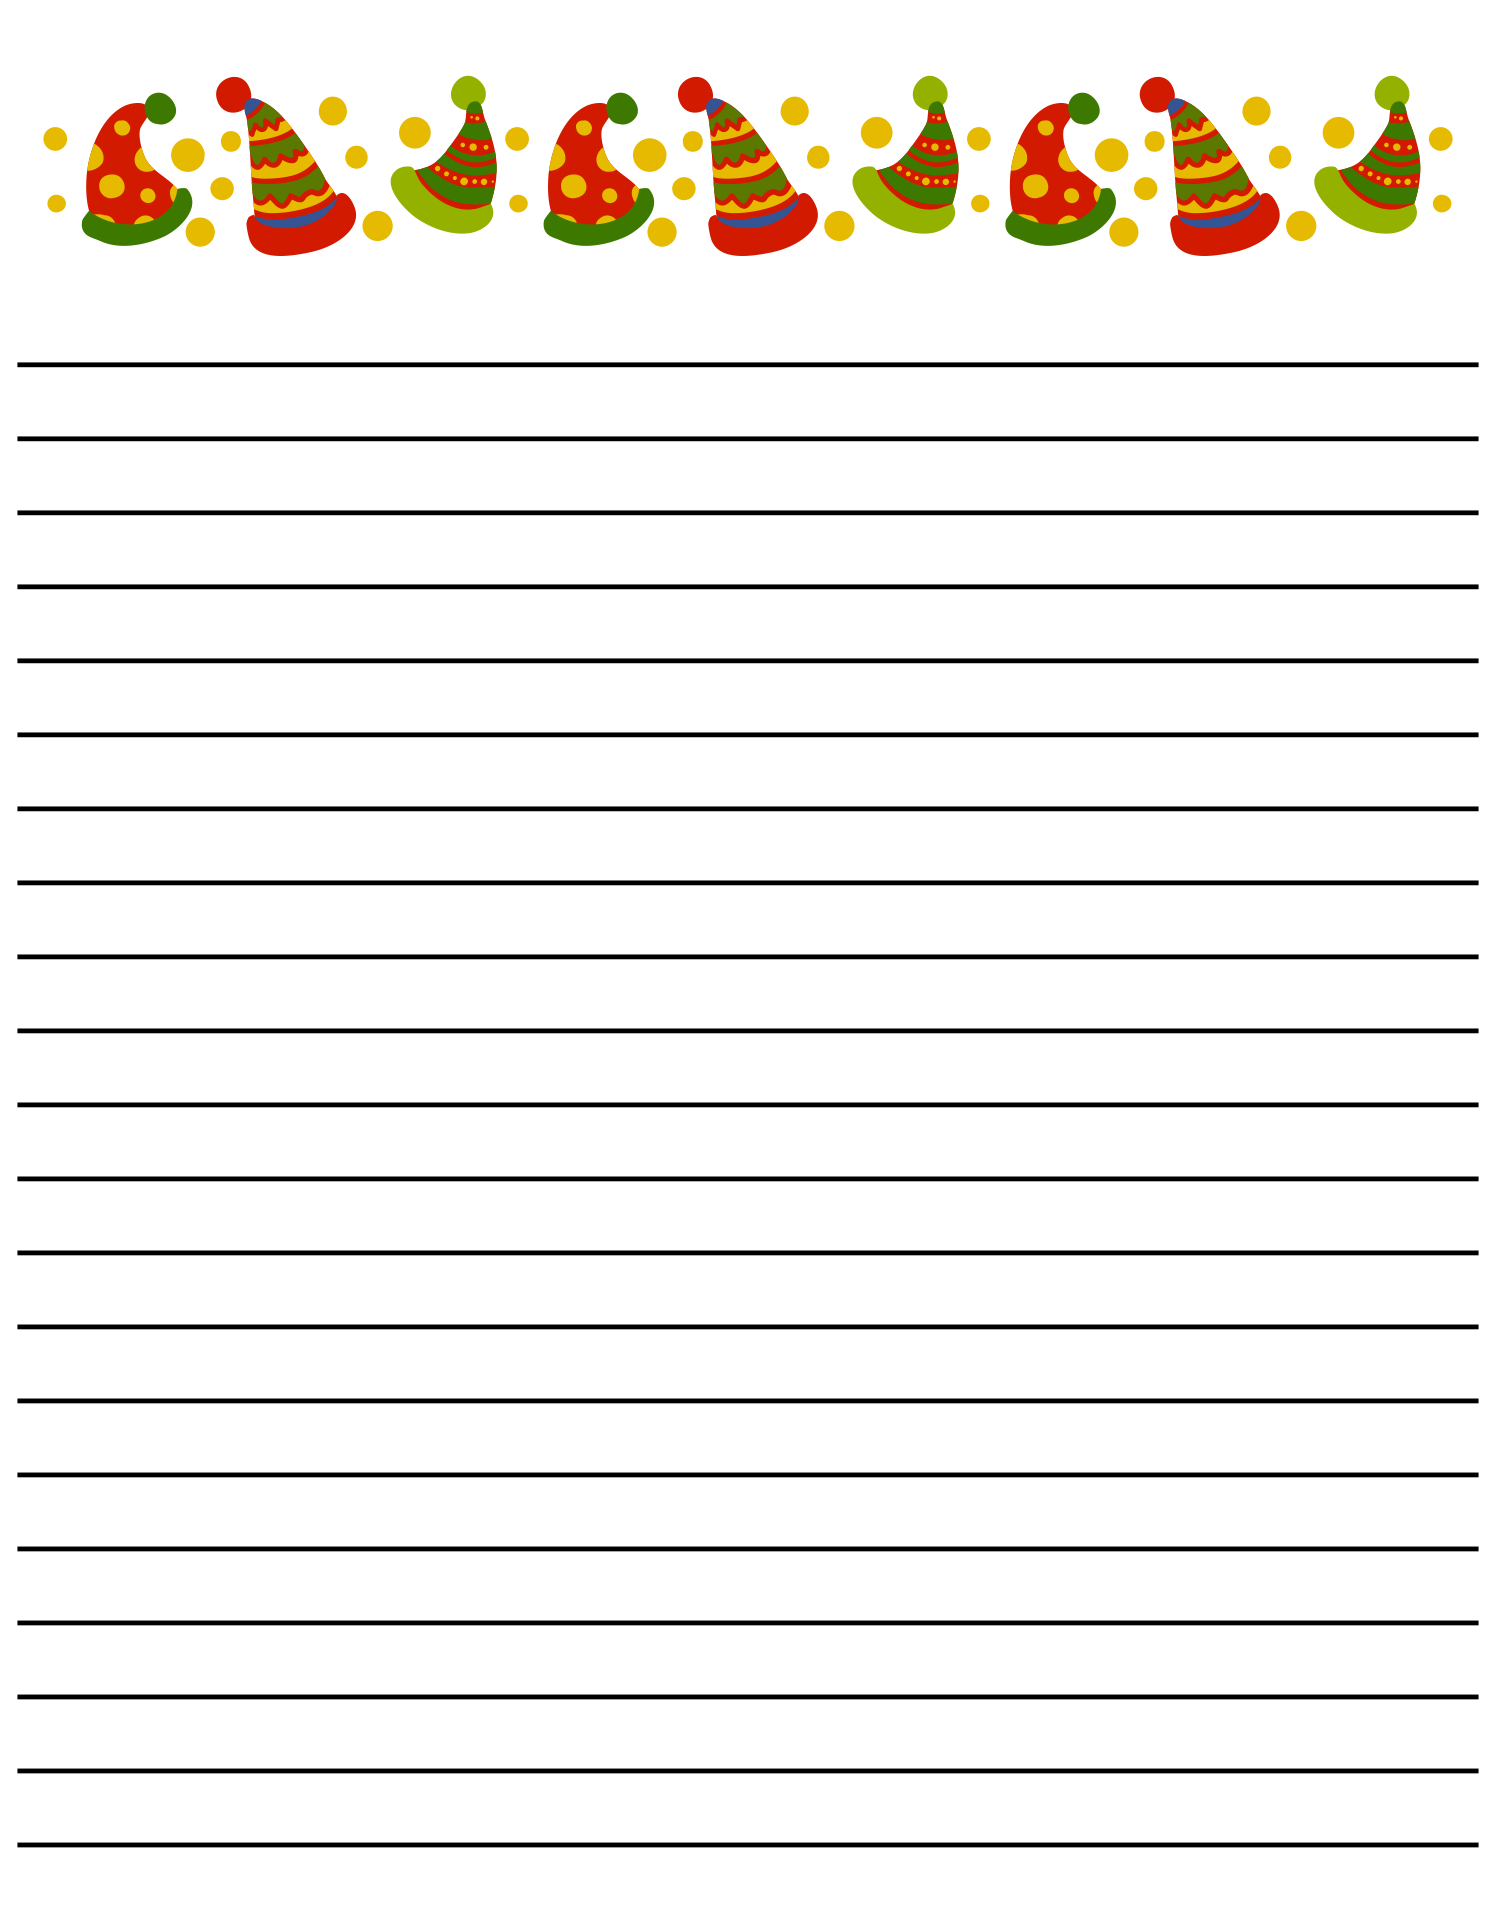 5-best-images-of-free-printable-christmas-border-lined-writing-paper-free-printable-lined